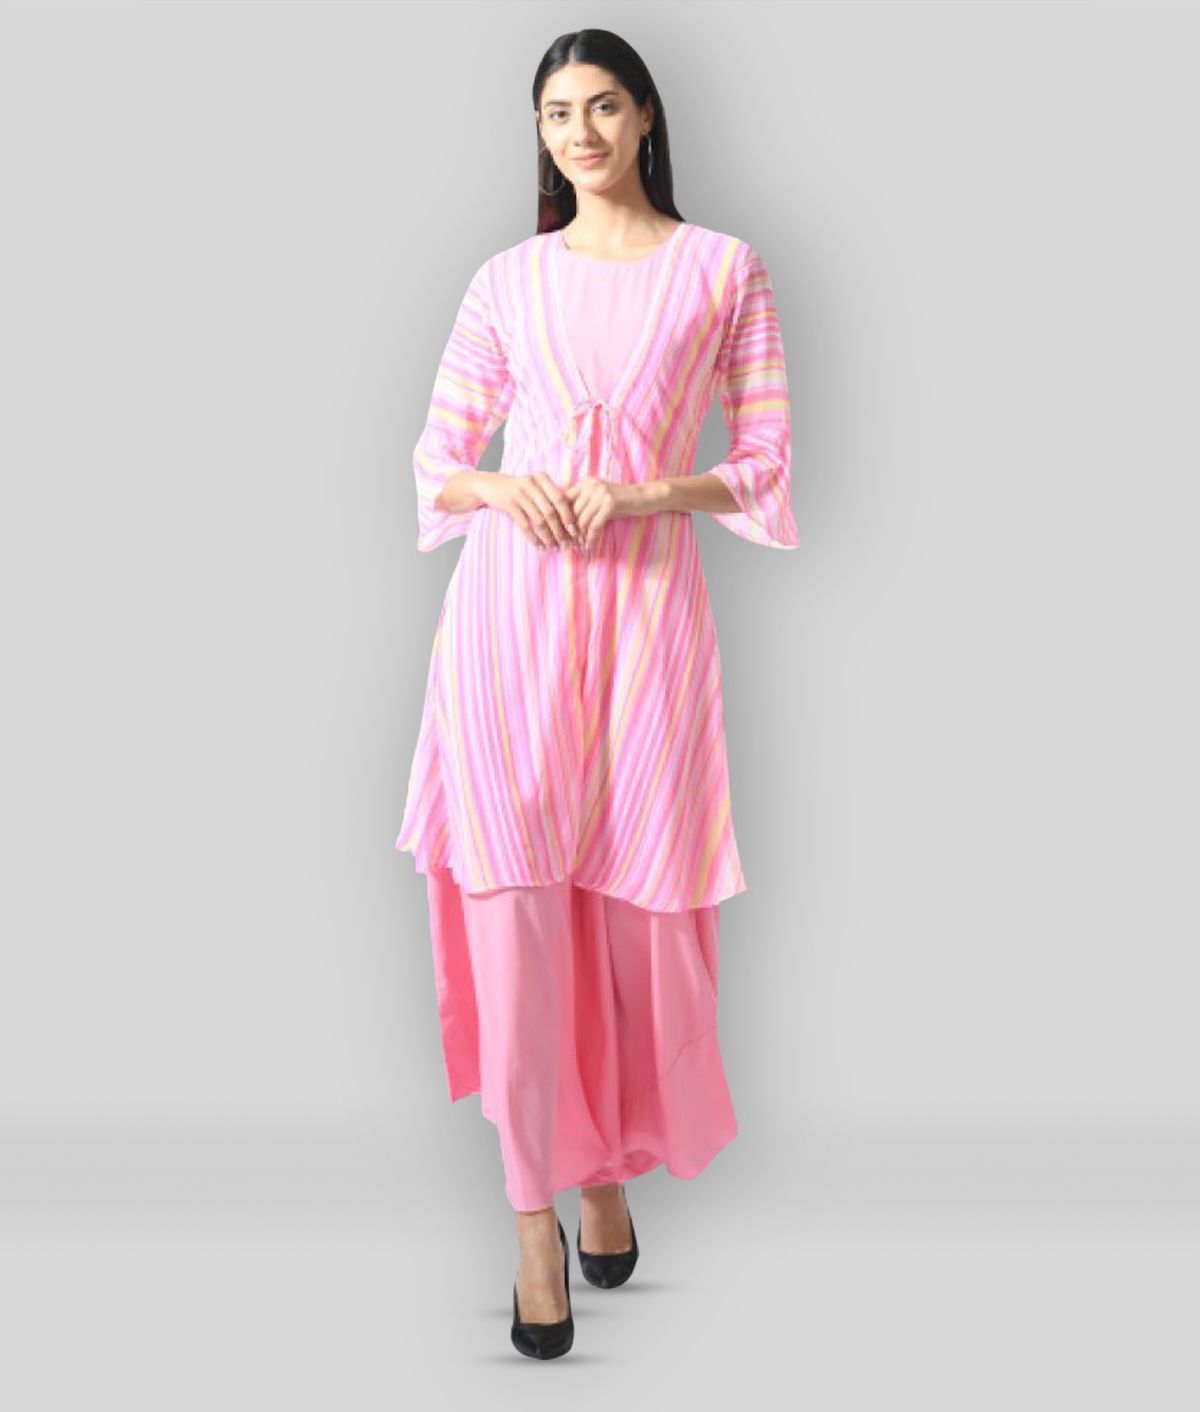     			Rudrakriti - Pink Polyester Women's A-line Dress ( Pack of 1 )